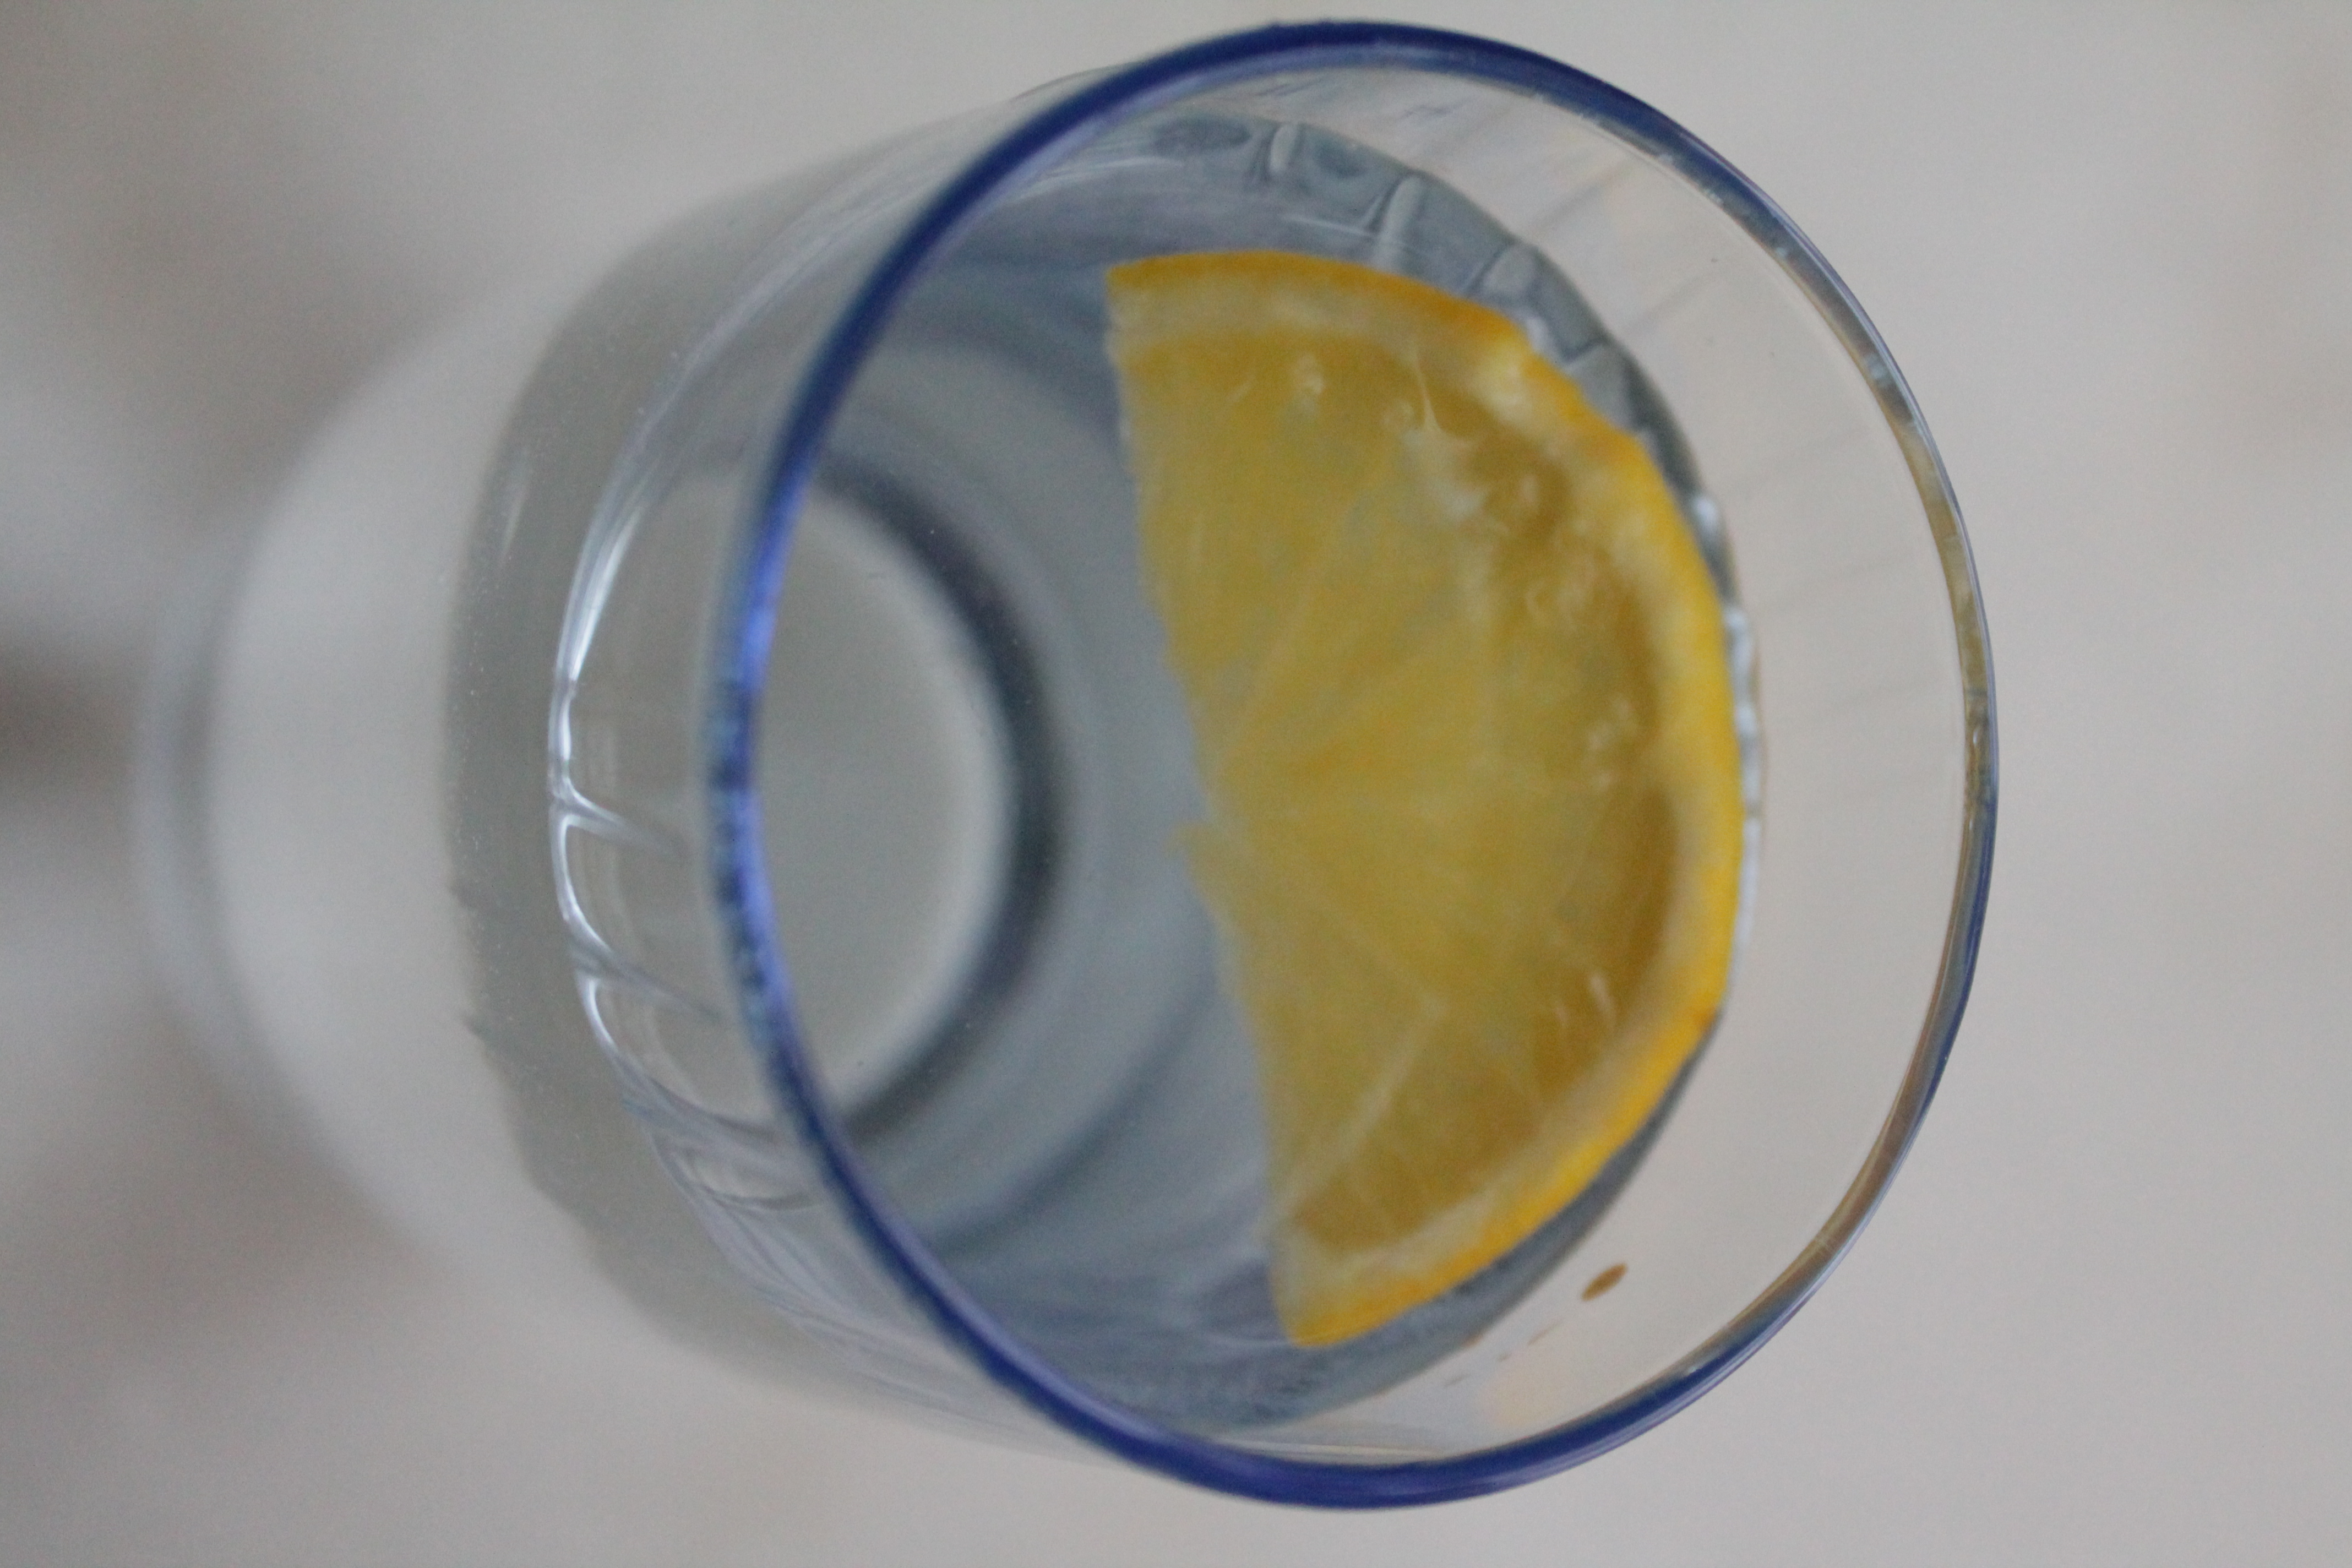 When Life Gives You Lemons – Put Them In Your Water